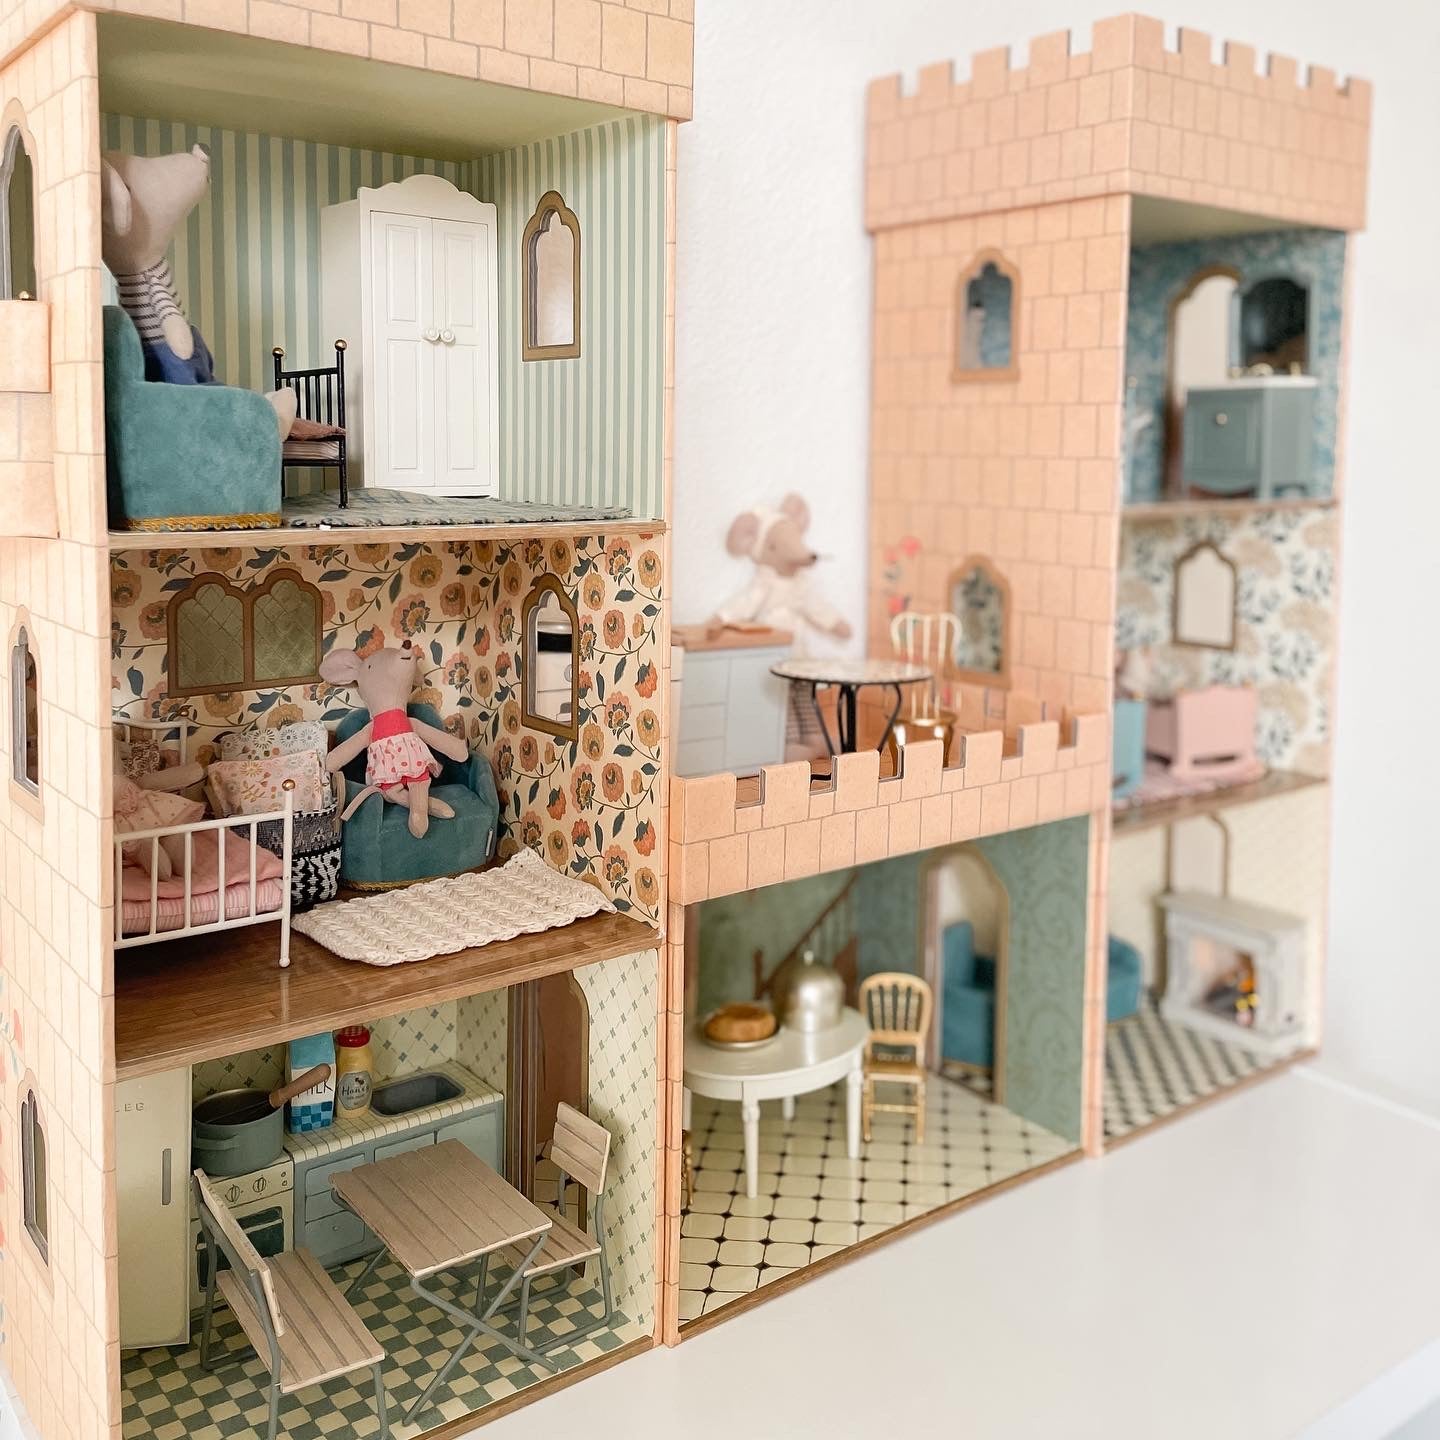 Castle Hall - Majestic Playroom for Imaginative Adventures